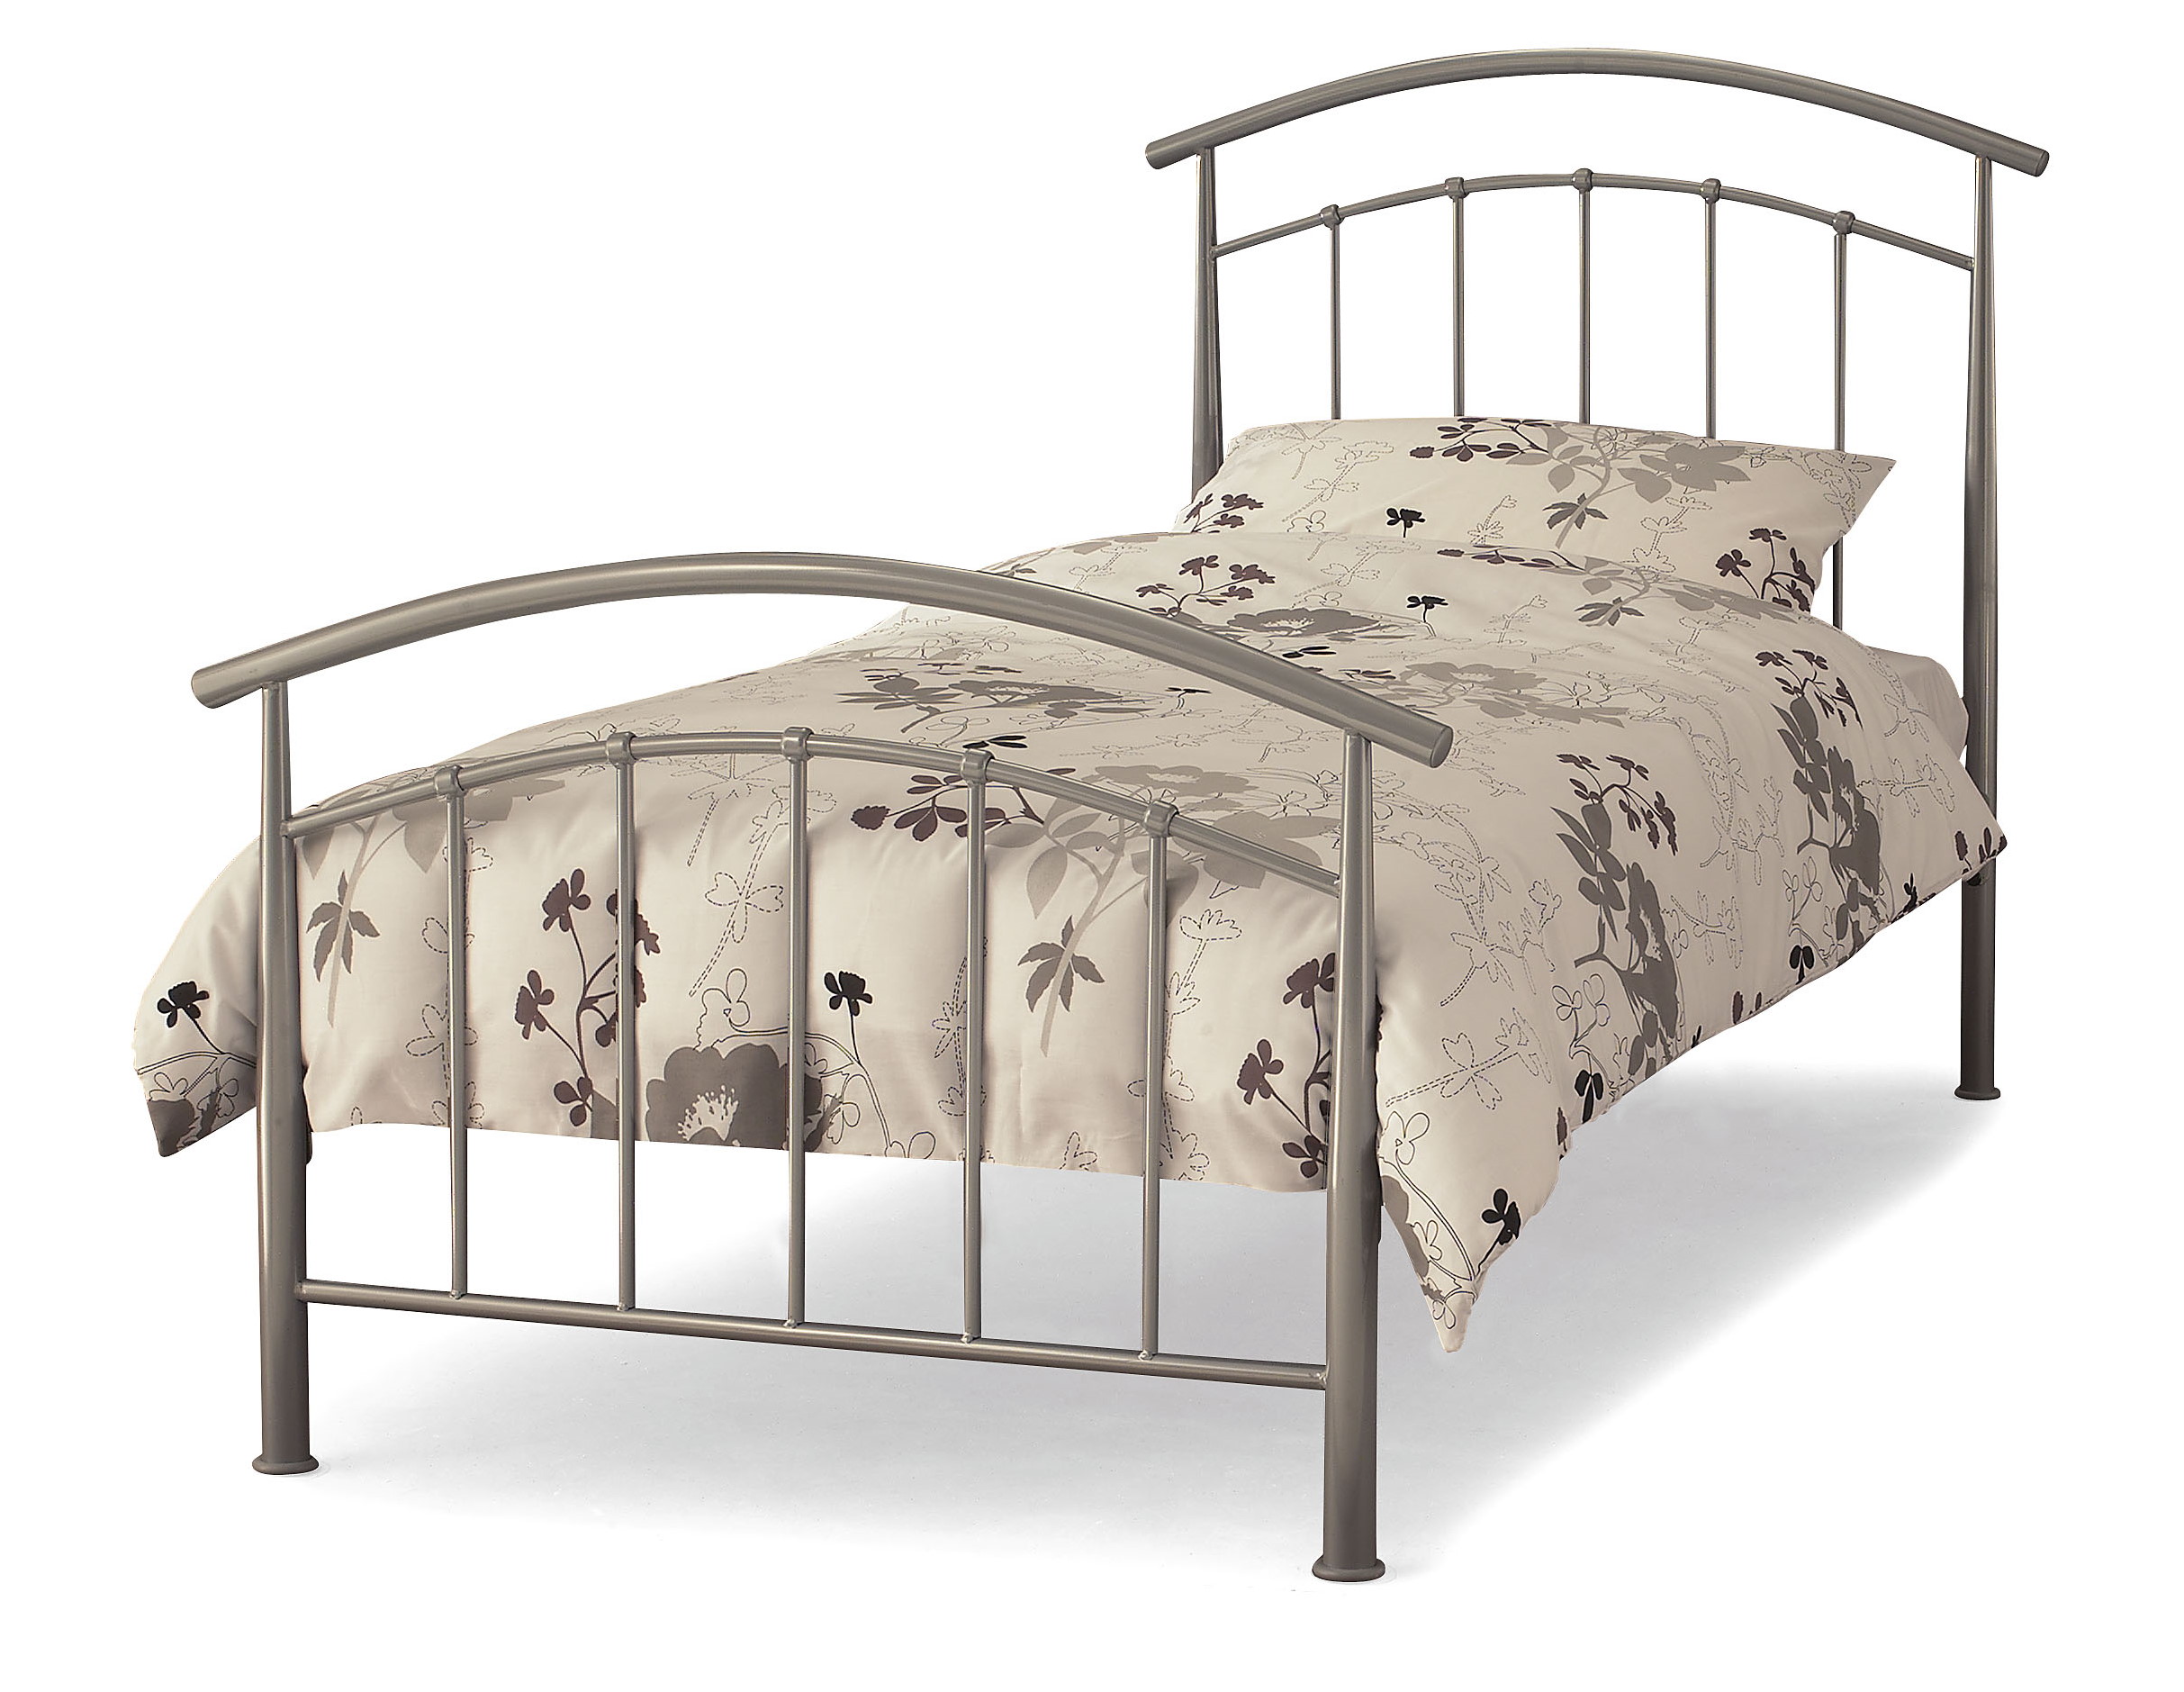 3ft Standard Single Silver Metal Bed, What Size Is A Standard Single Bed Frame